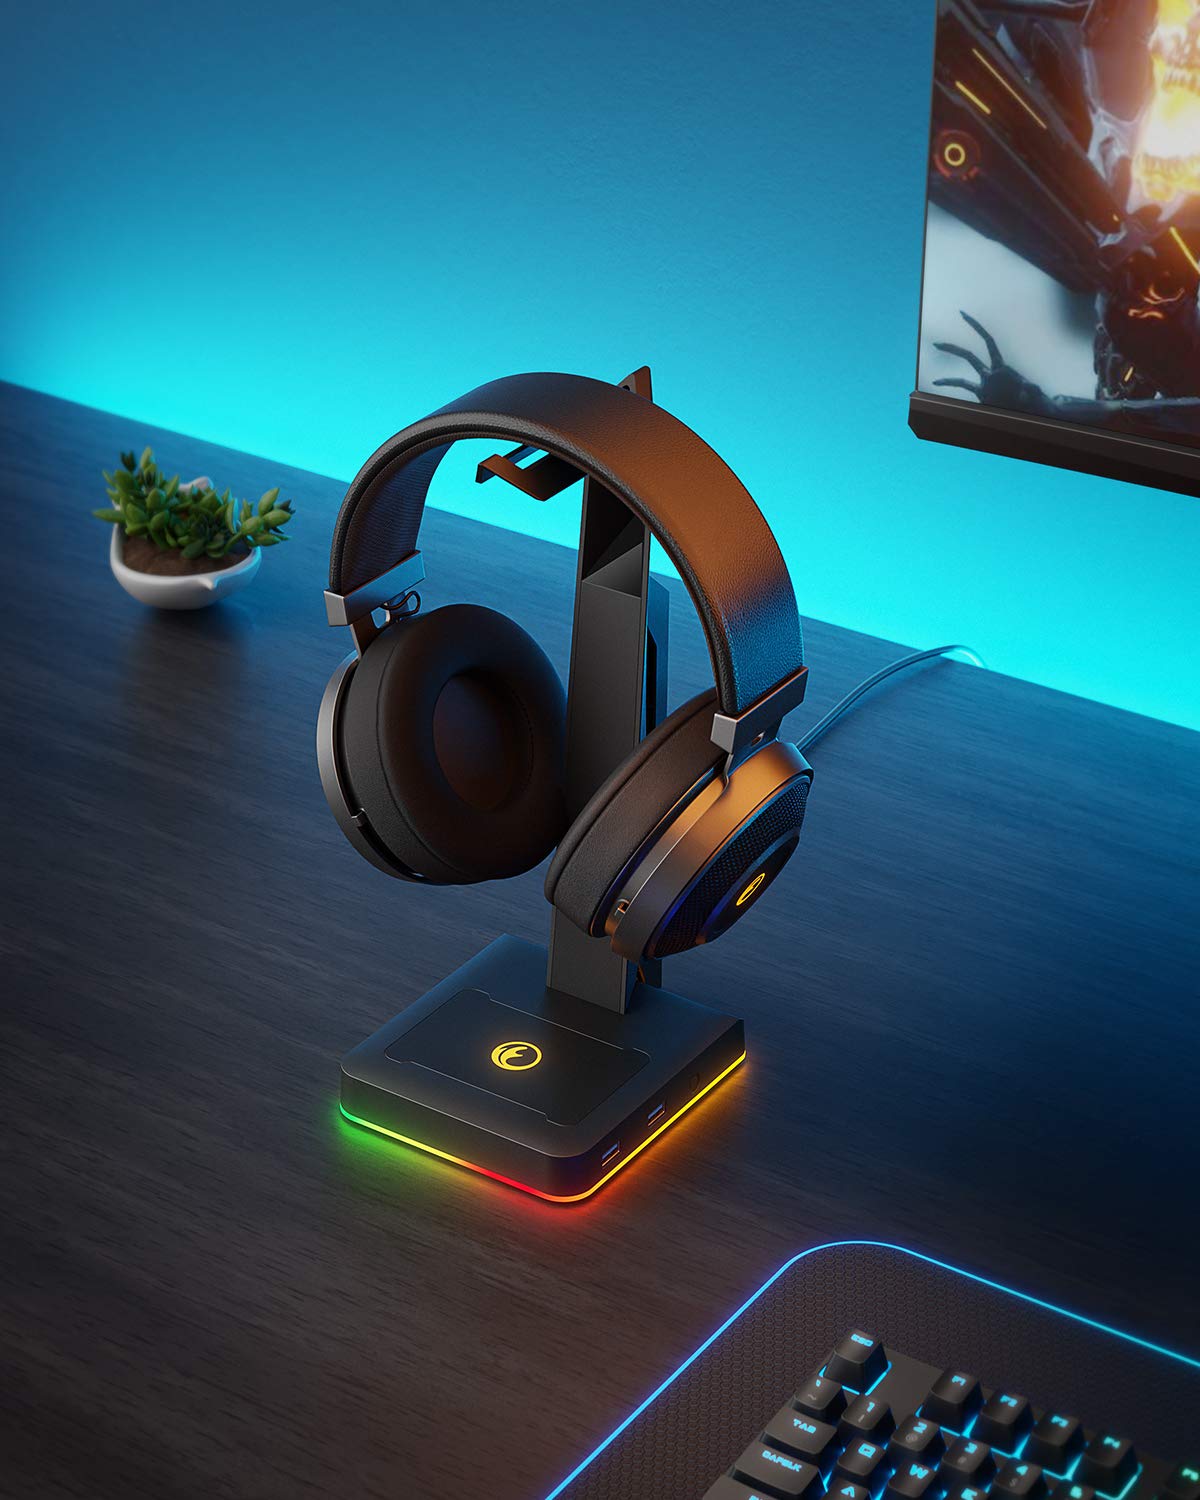 IFYOO RGB Gaming Headset Stand with 2 USB Ports, Game Headphone Mount for PC, Xbox One, PS4, Switch, Earphone Holder Hanger, Great for Gaming Stations, Fancy Desk Gamer Accessories, Black - amzGamess